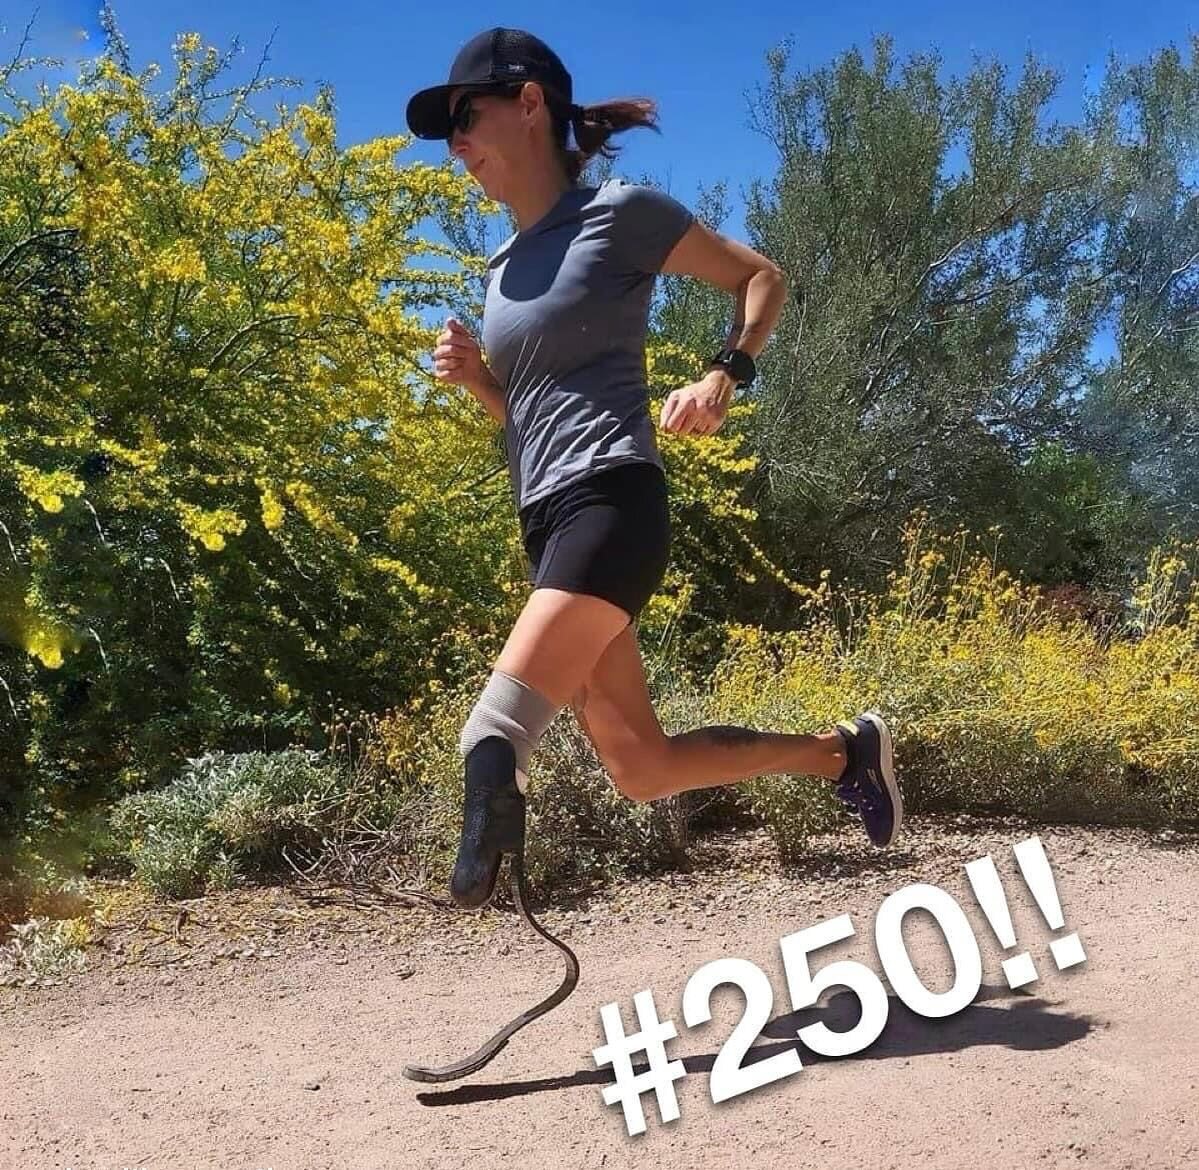 Come join us tomorrow (Saturday, April 6) as we celebrate Jacky&rsquo;s 250th consecutive half marathon!! @ncrunnerjacky 

We will meet at the main entrance of San Tan Regional Park at 7:00am.  All paces are welcome and no one gets left behind. There